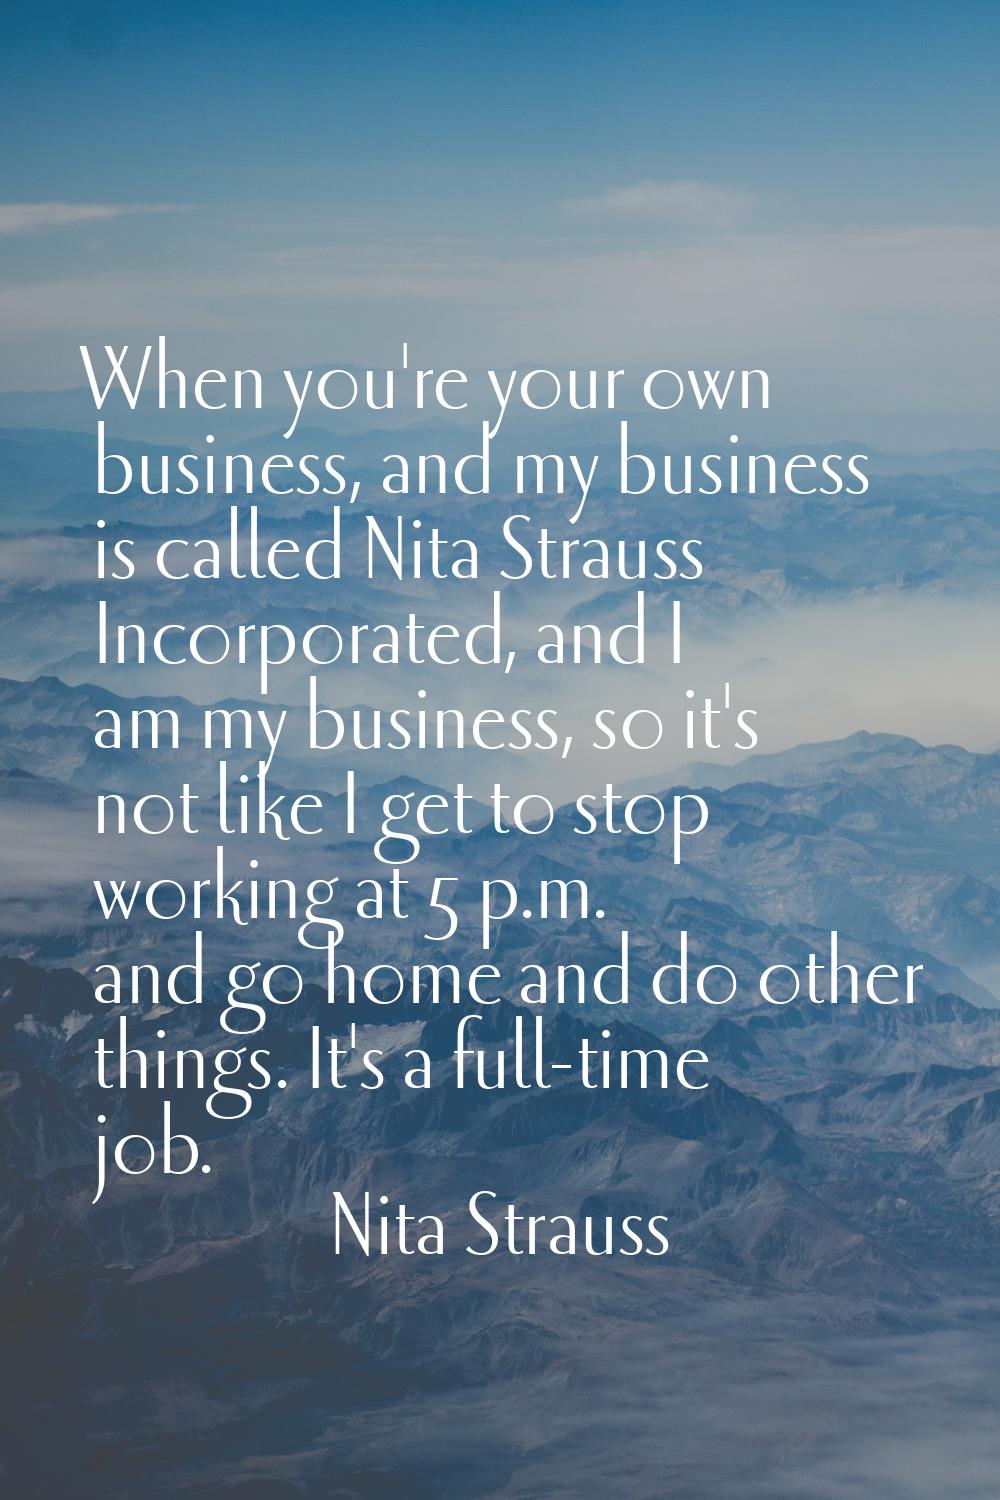 When you're your own business, and my business is called Nita Strauss Incorporated, and I am my bus